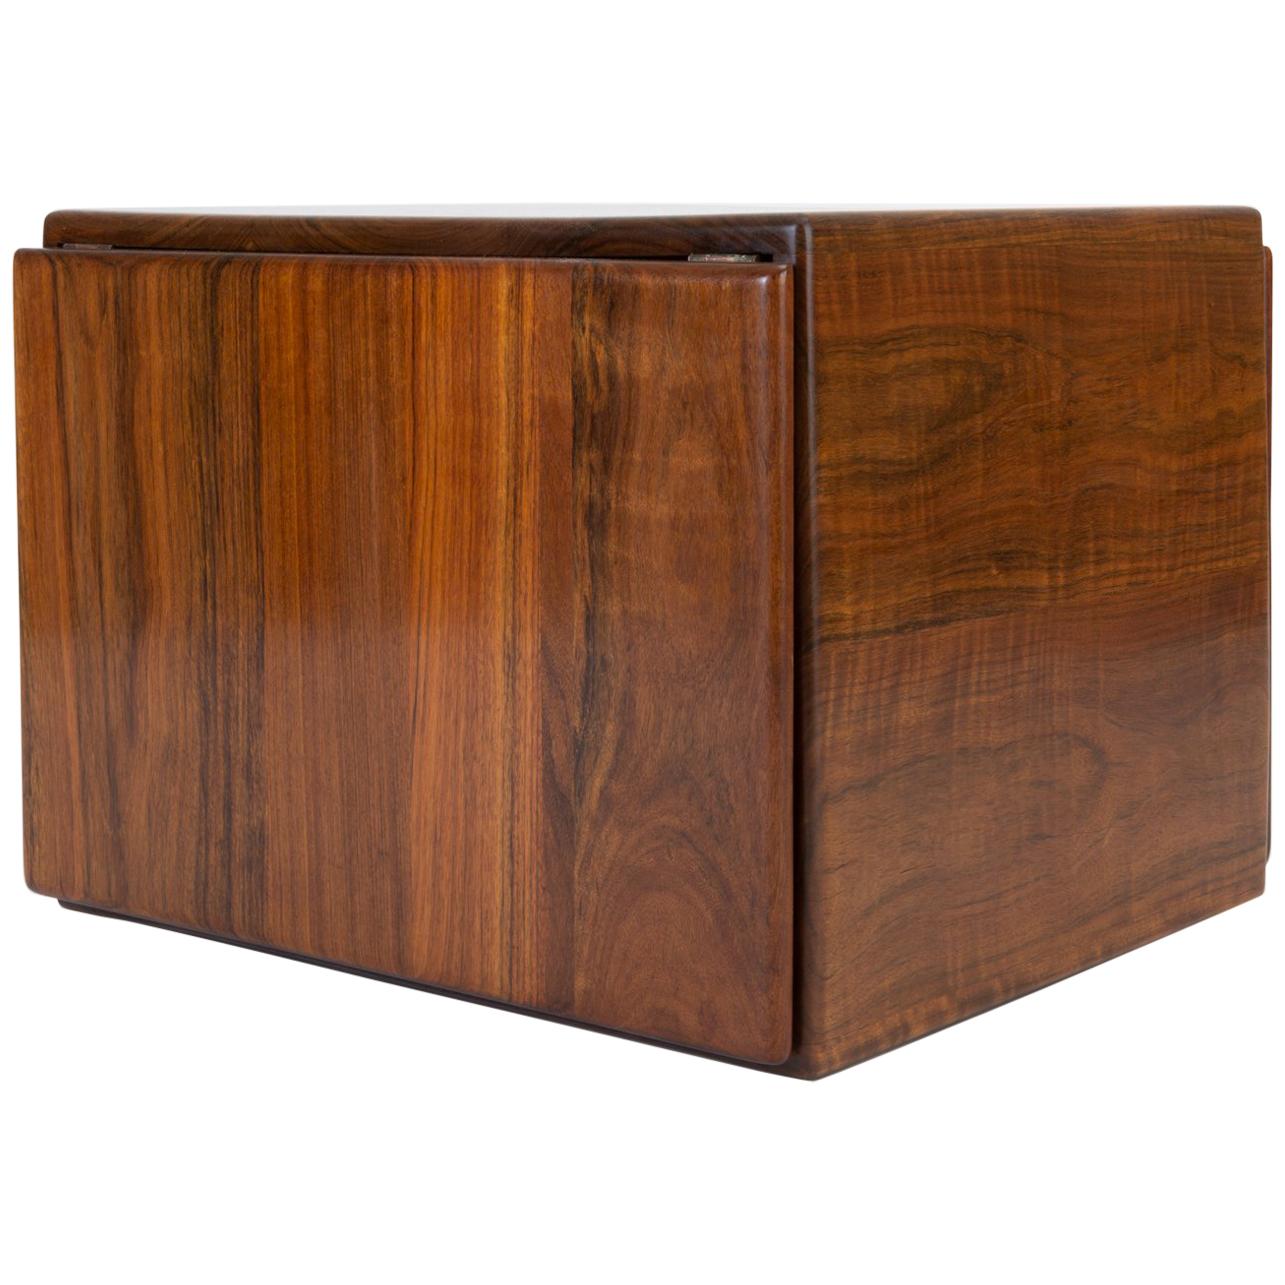 Cube Side Table or Storage Chest in Rare African Shedua Wood by Gerald McCabe